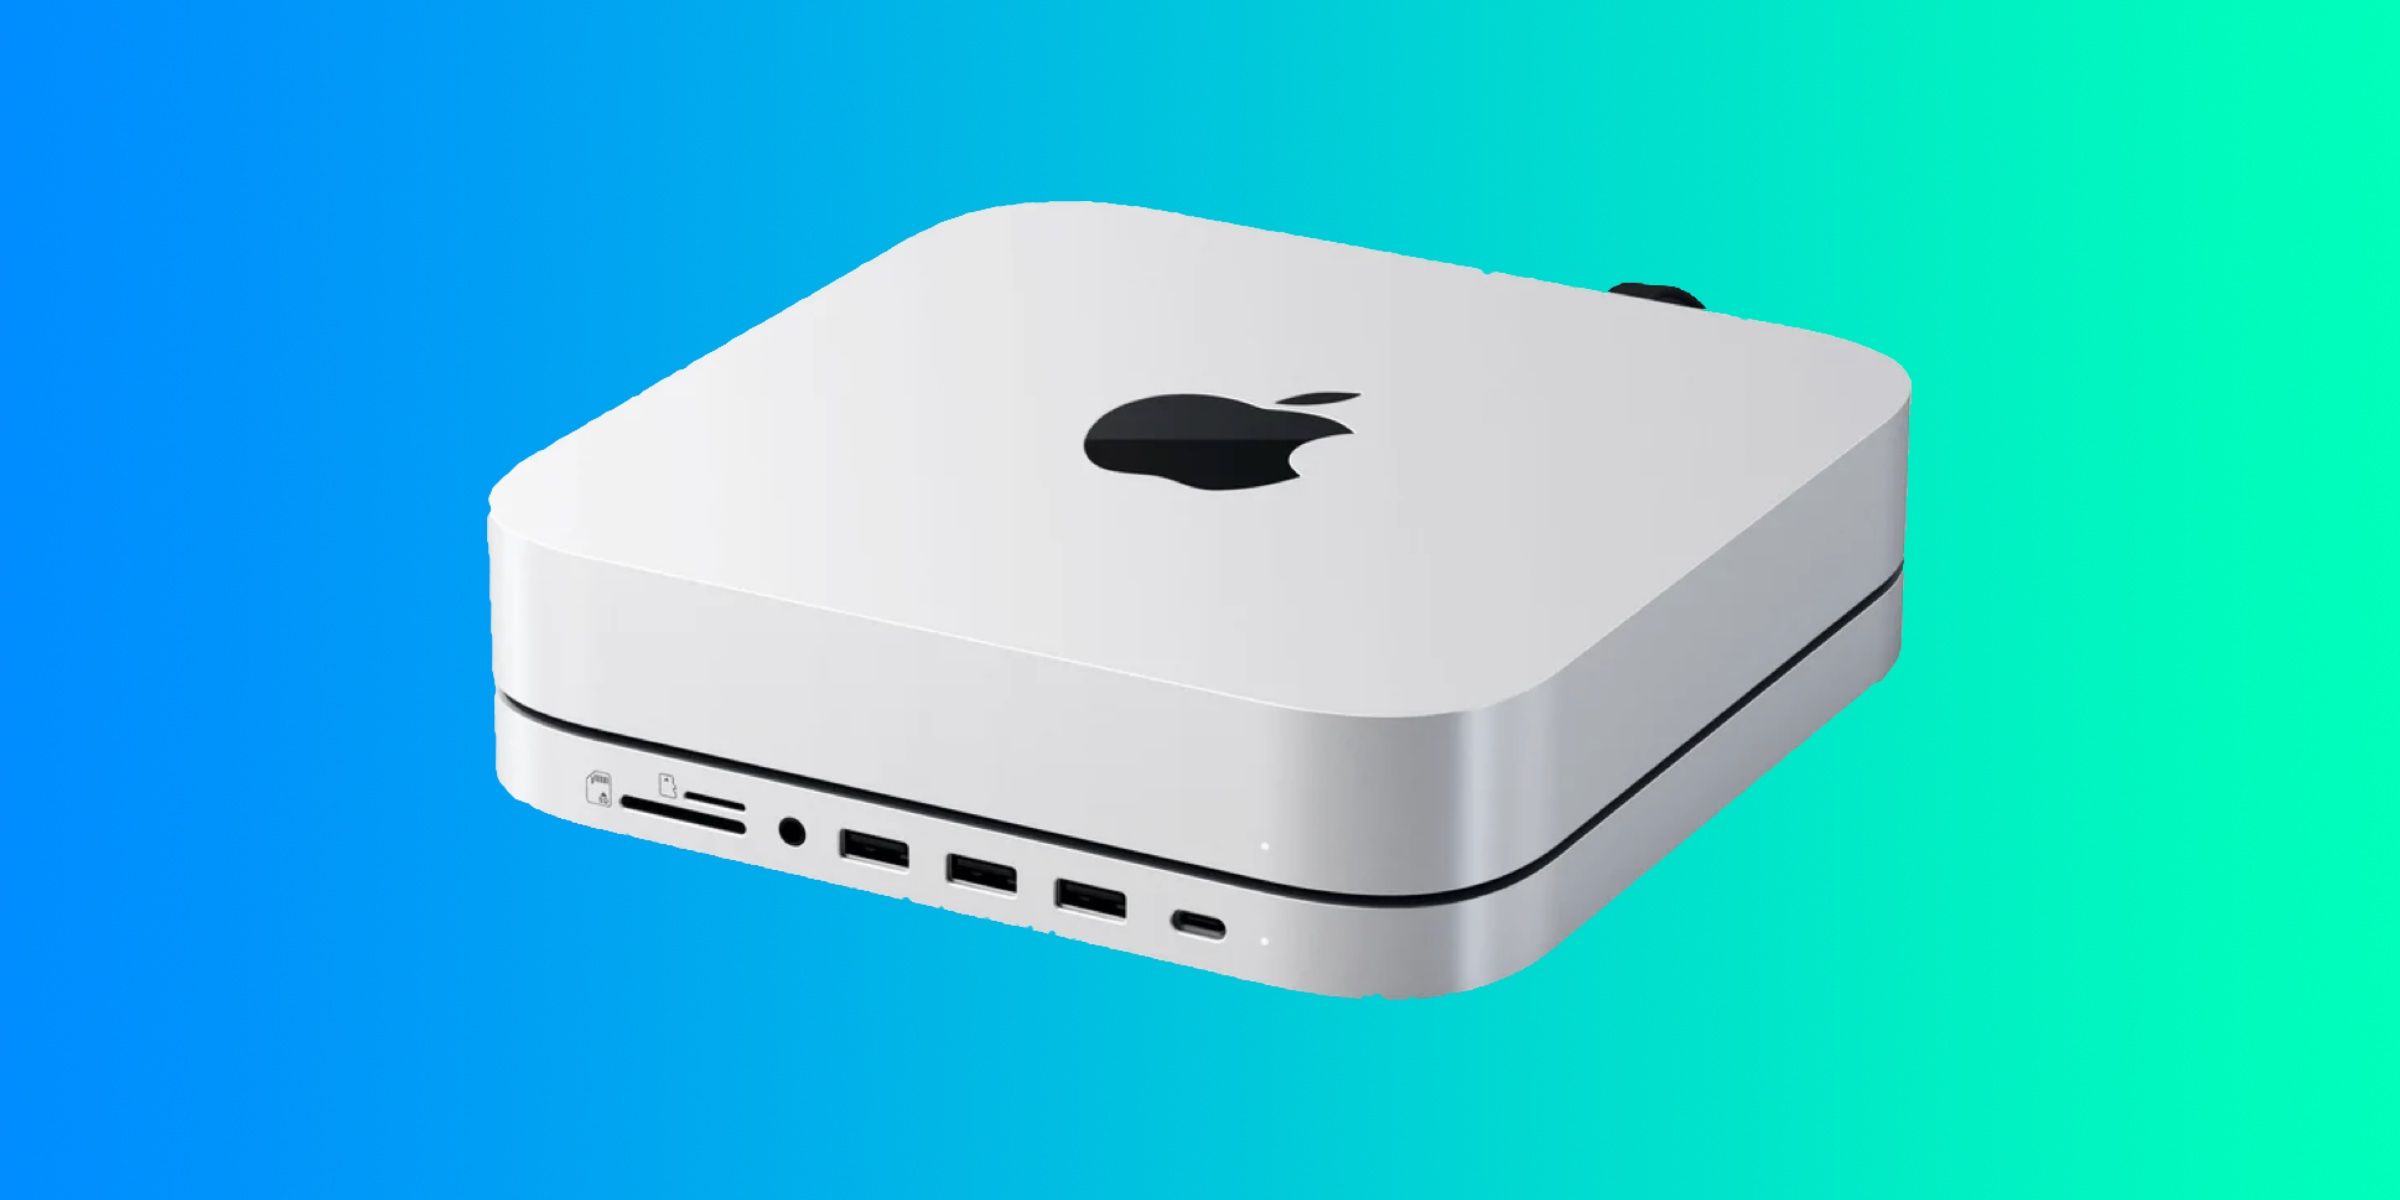 M2 Mac mini with Satechi Dock, offering expandable storage with an internal SSD enclosure.